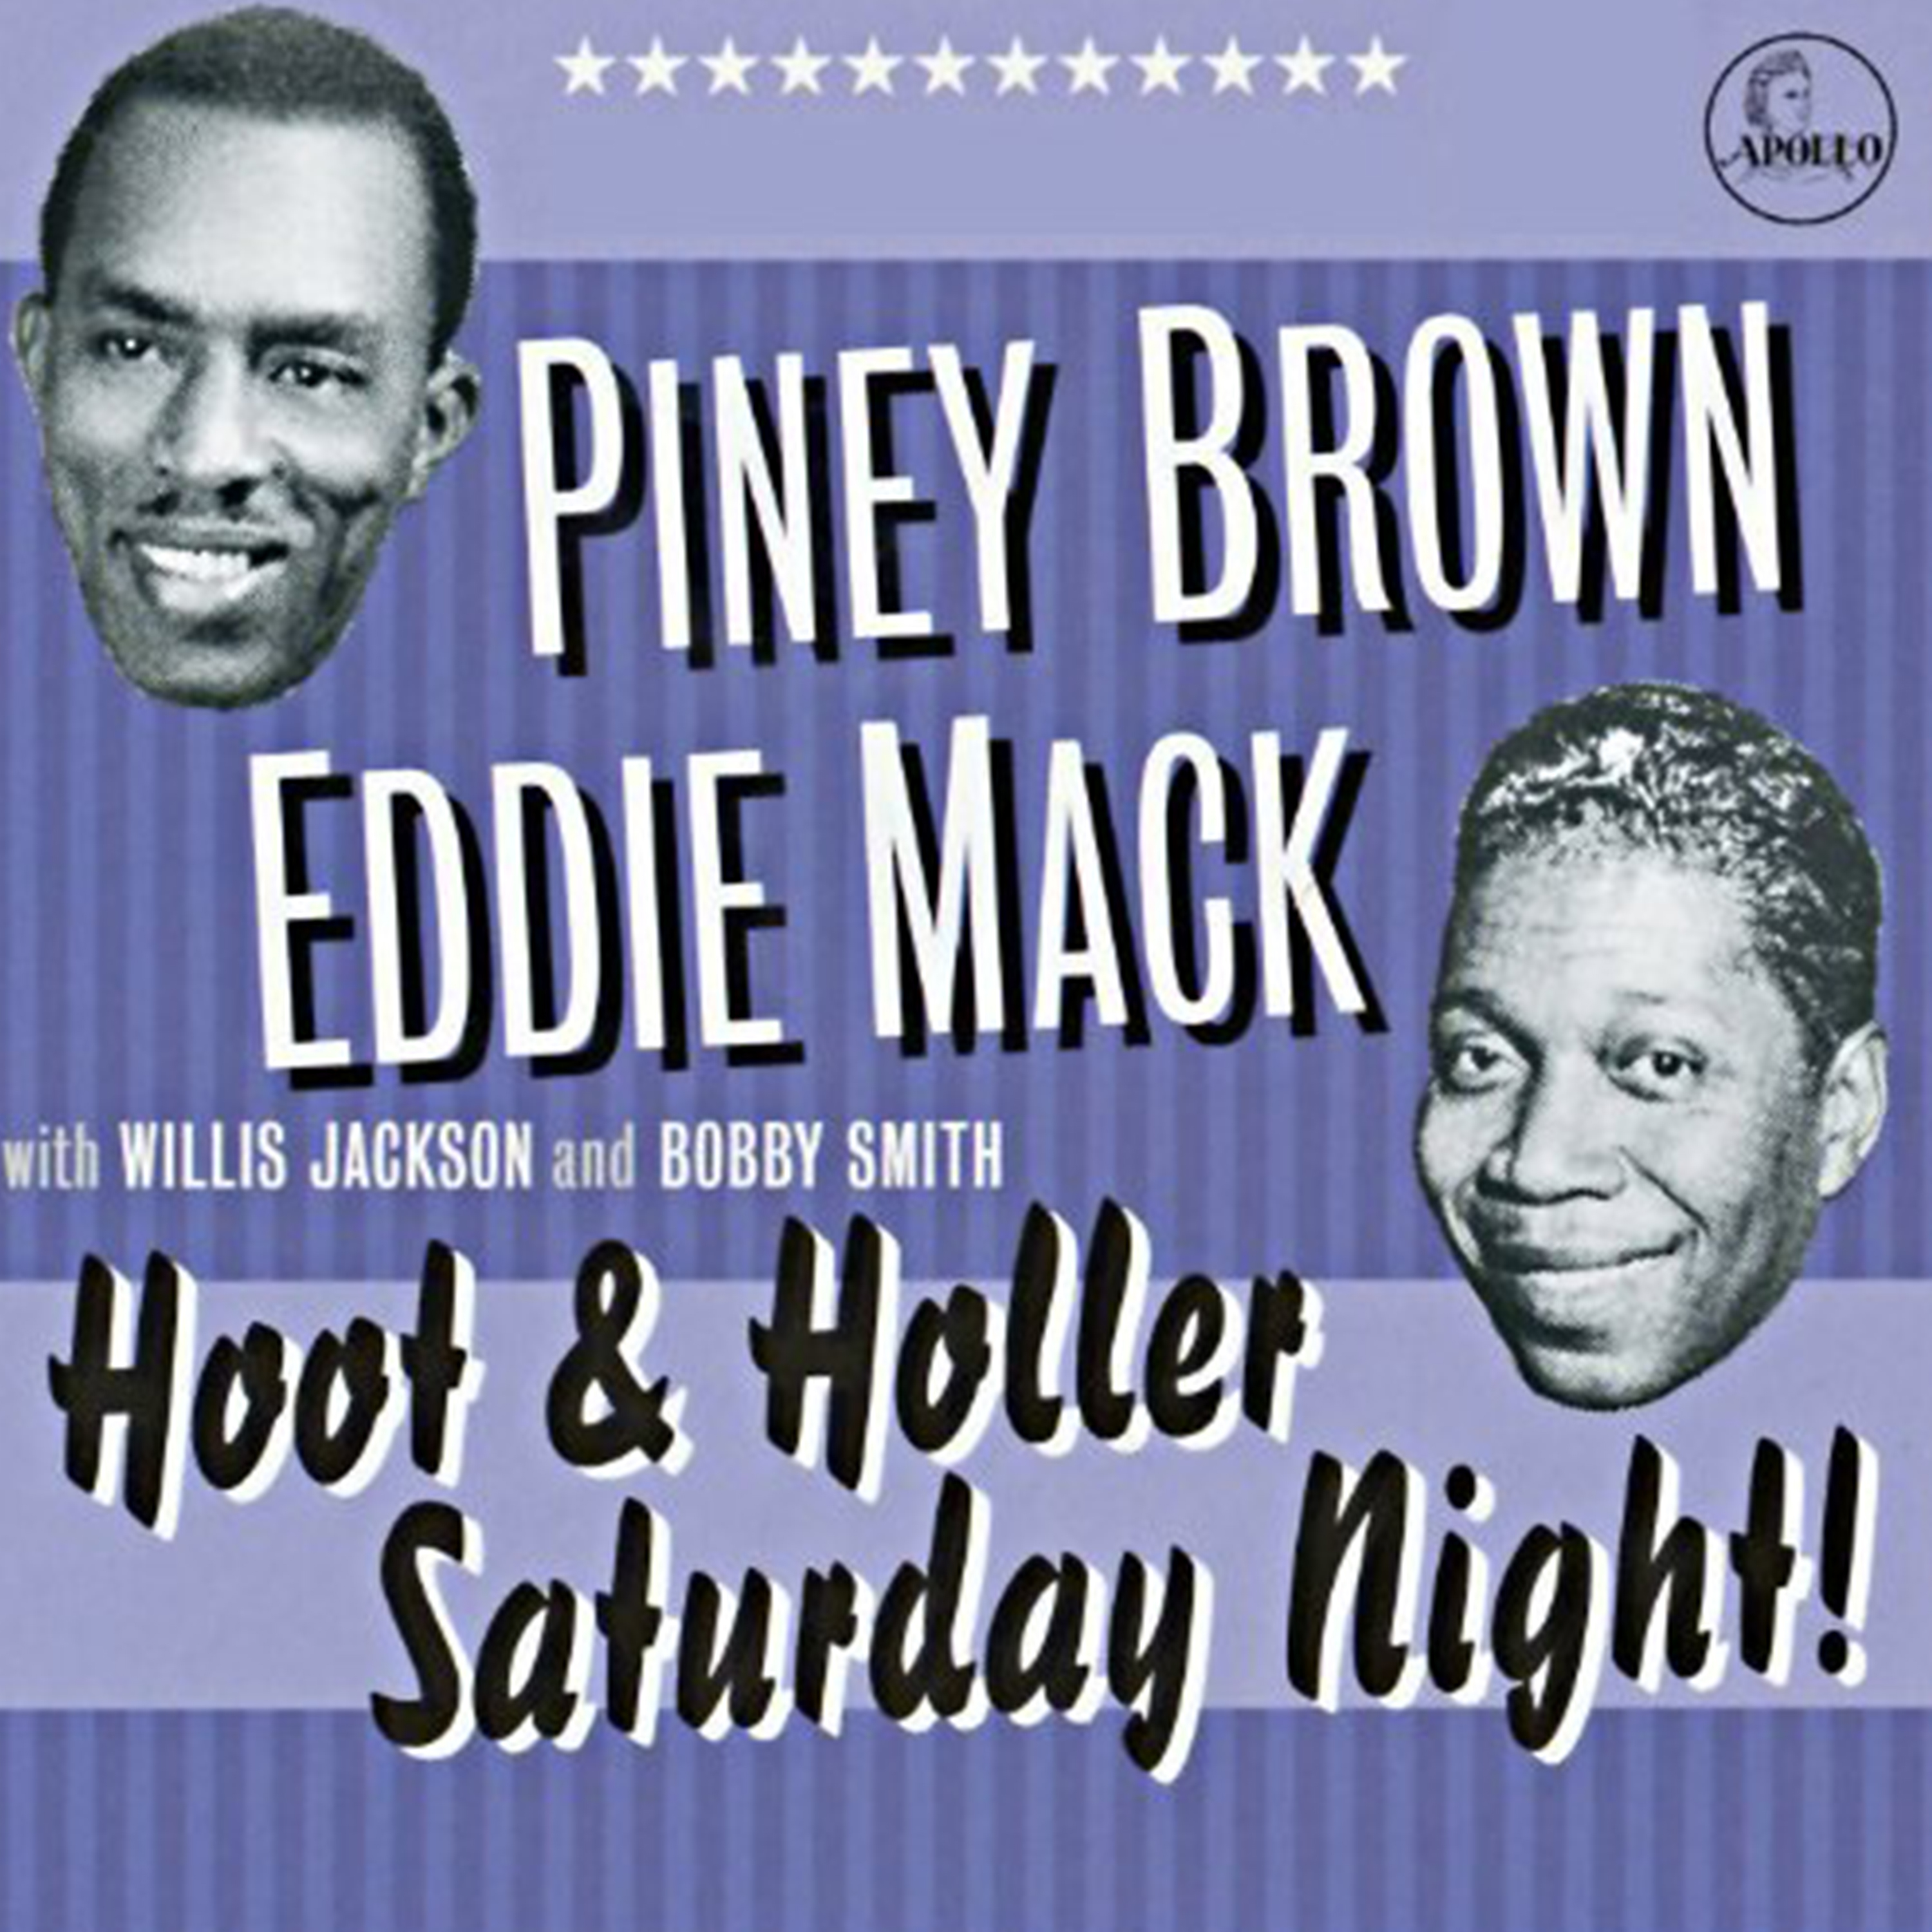 Piney Brown Boogie